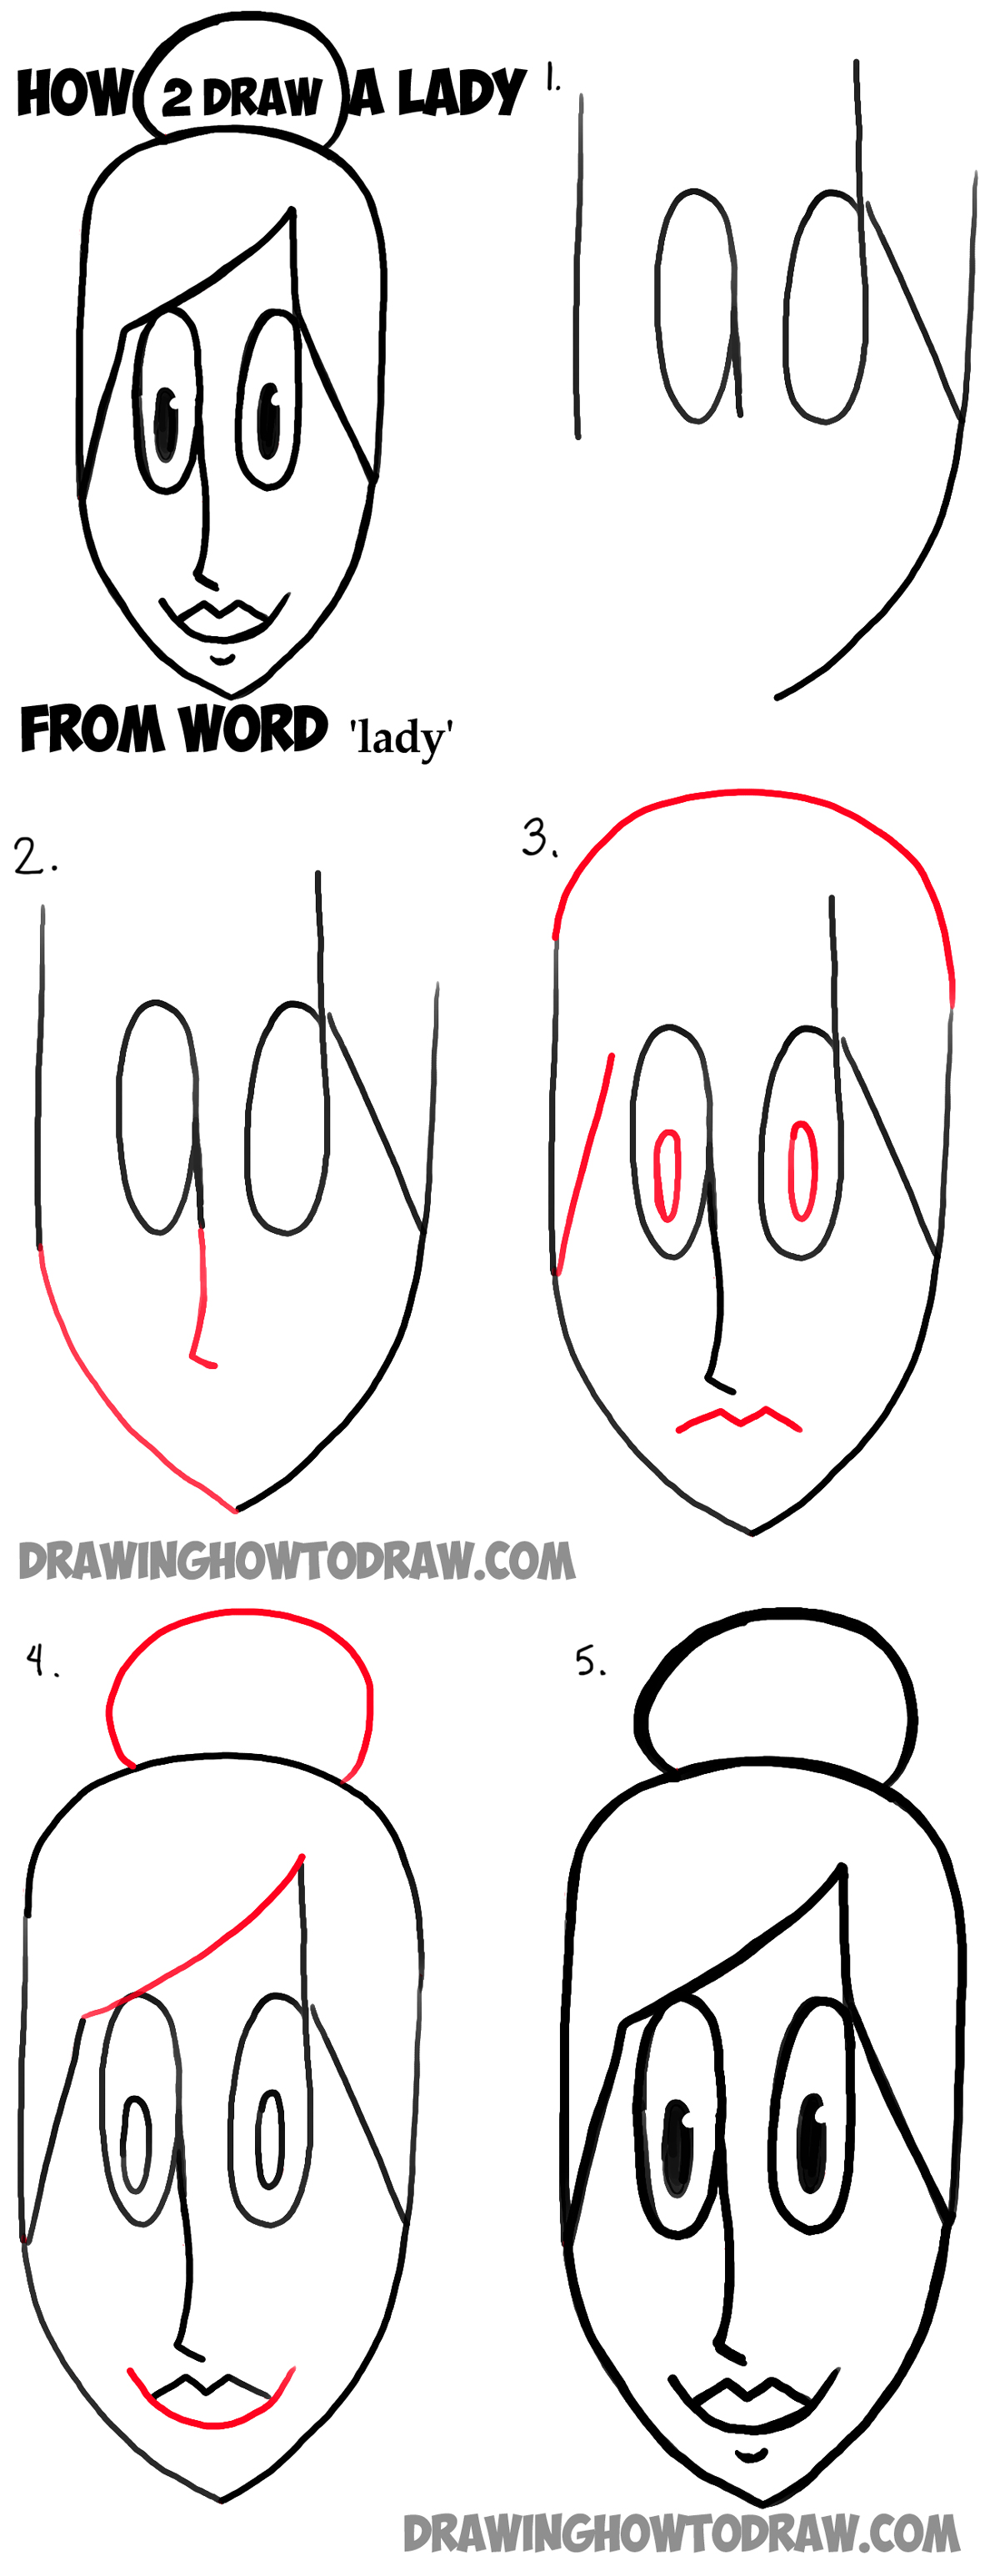 How to Draw a Woman or Lady from the Word Lady Simple Step by Step Tutorial for Kids